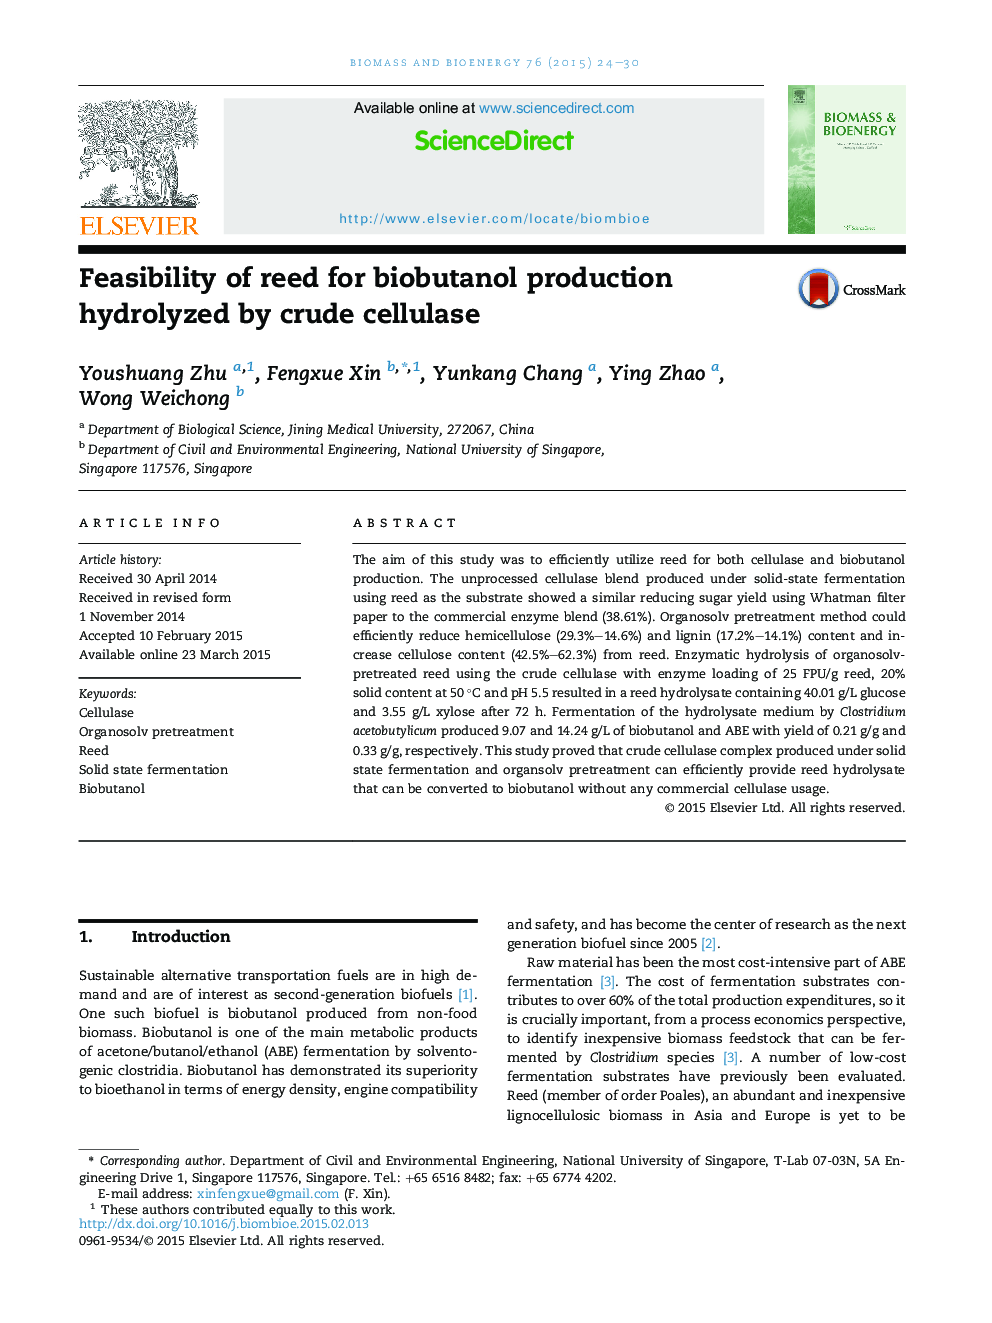 Feasibility of reed for biobutanol production hydrolyzed by crude cellulase